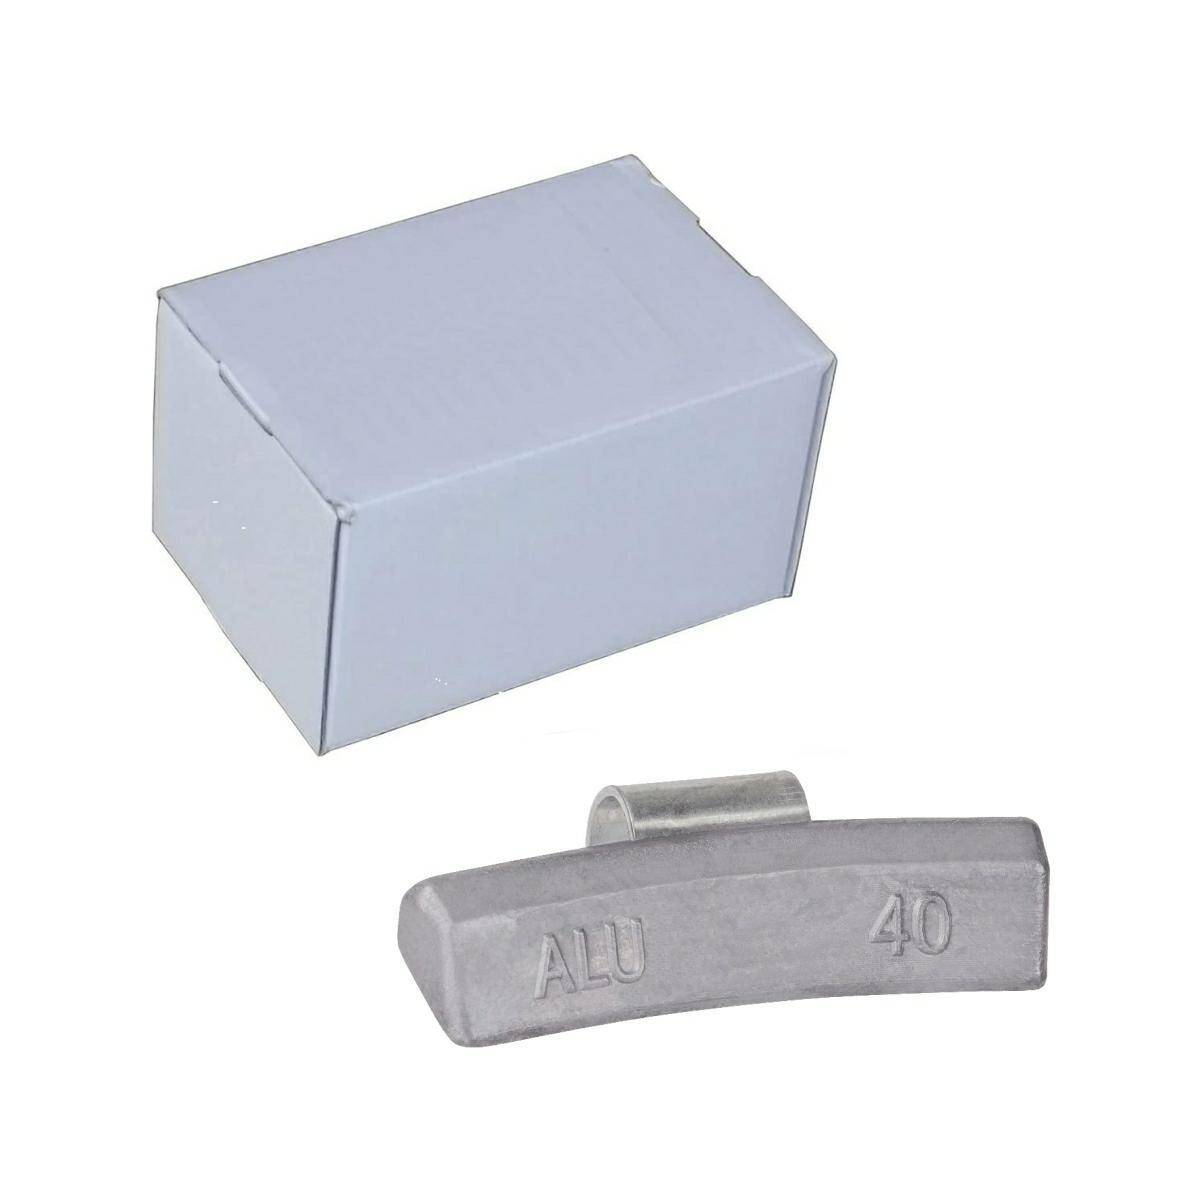 Lead stud weight ALU AT Type 608 40g (Pb) - pack of 100 (H608-40AT)